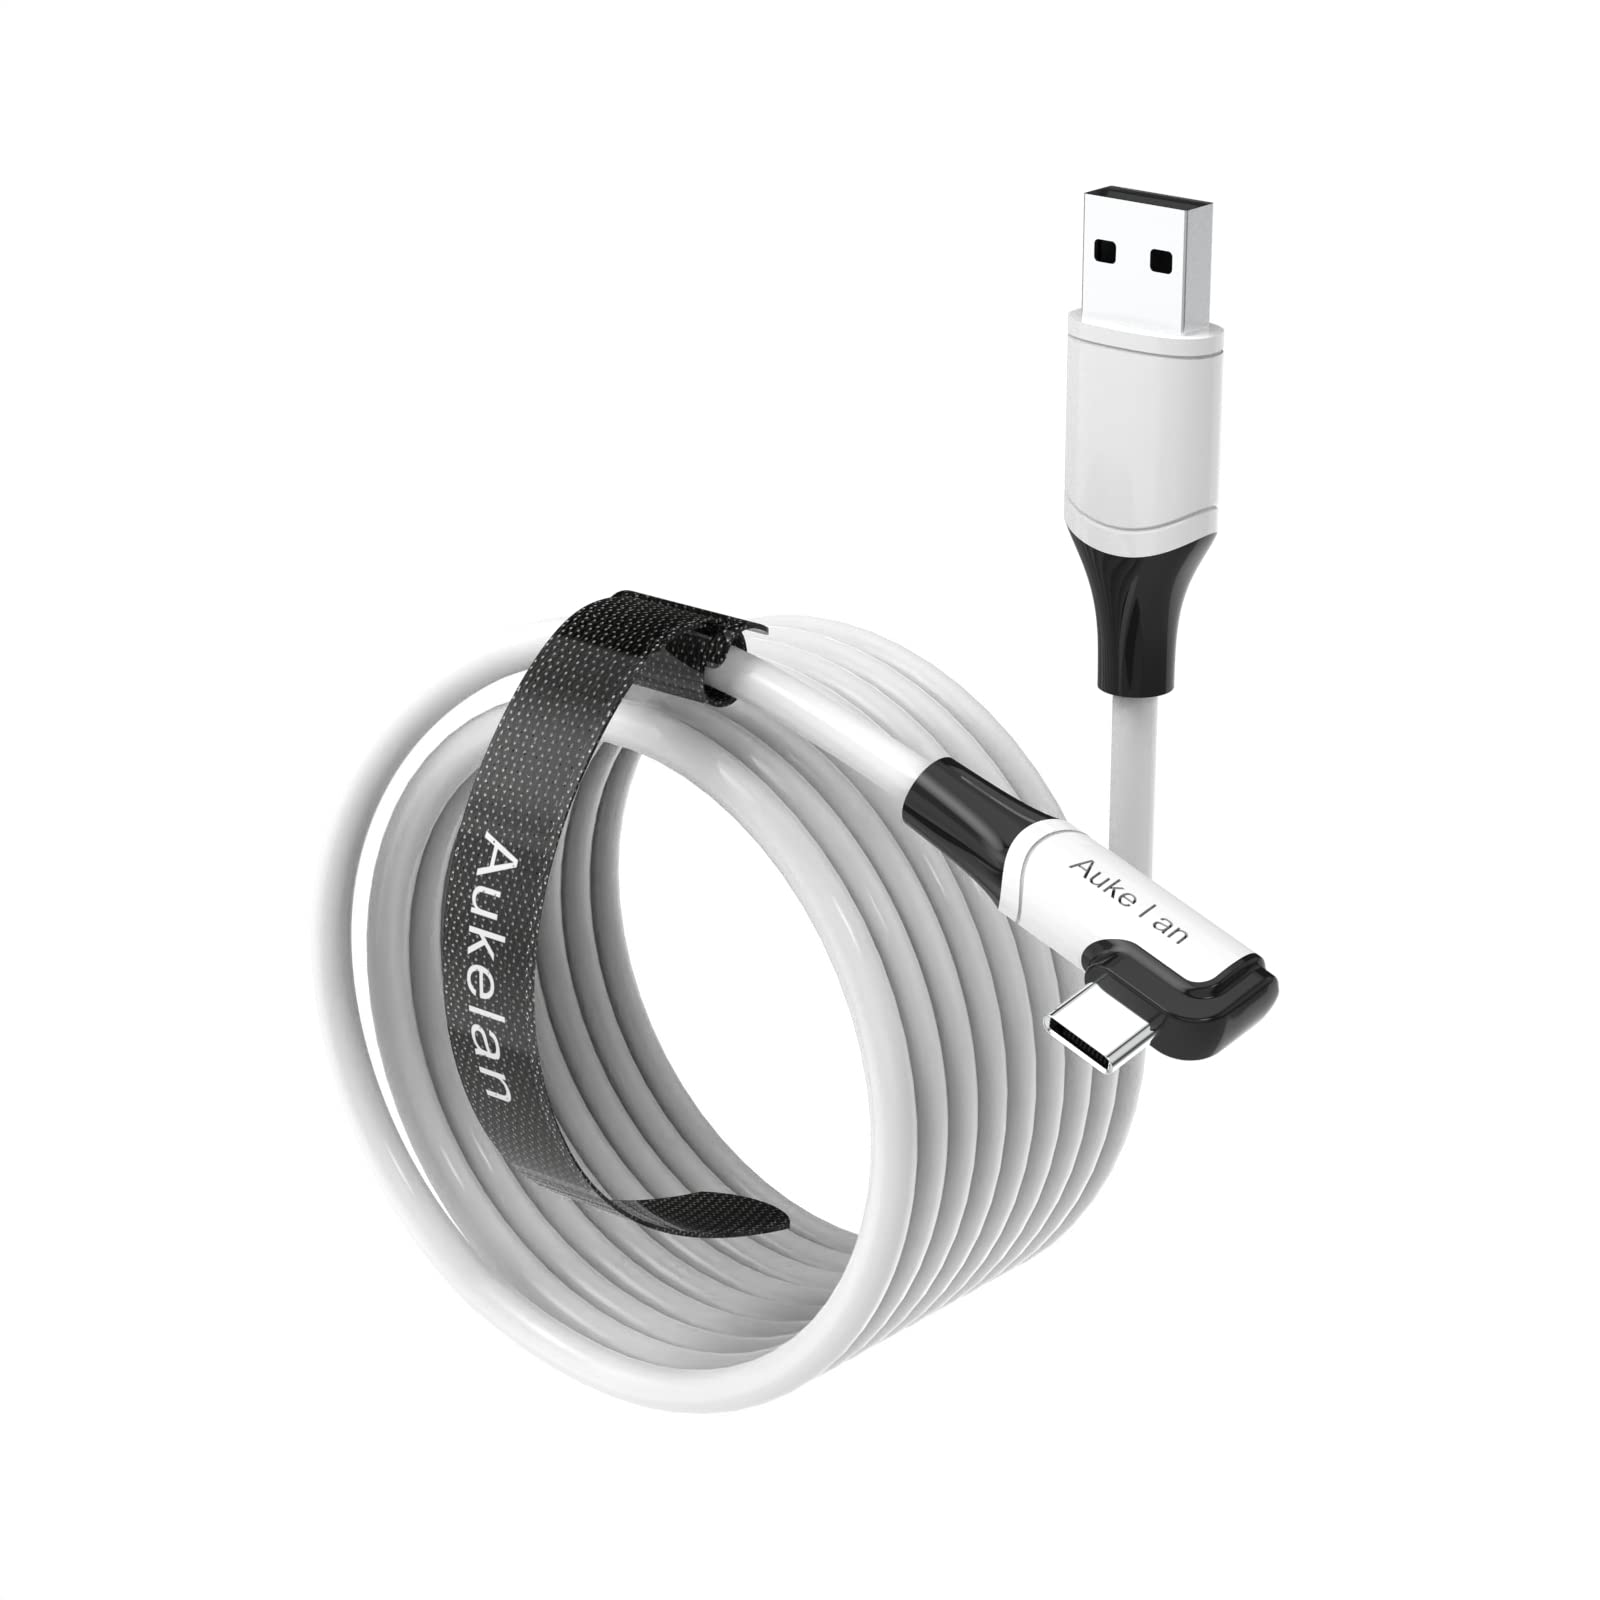 Aukelan Link Cable 10FT Compatible for Oculus Quest 2/Steam VR and PC, High Speed Data Transfer & 3A Fast Charging, USB 3.0 to USB C Cable for VR Headset and Gaming PC